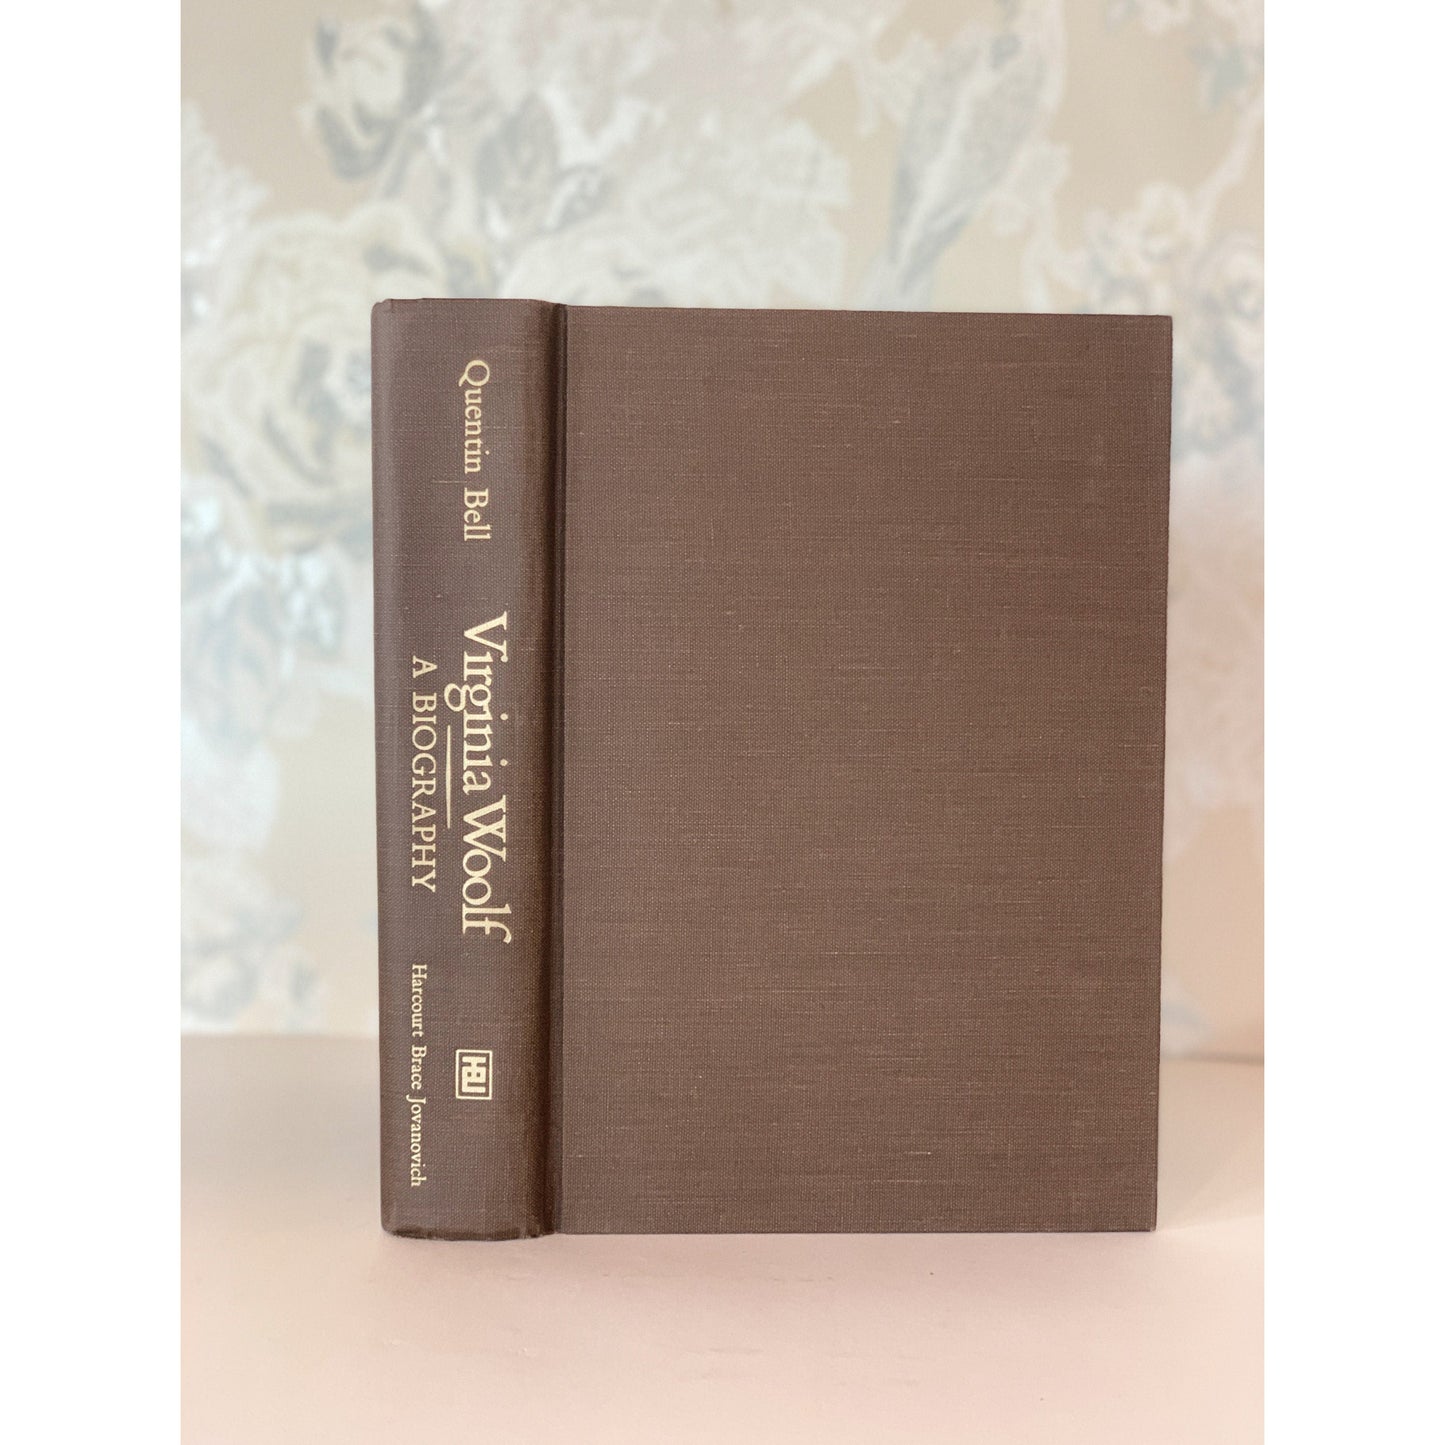 Virginia Woolf: A Biography, 1972 Hardcover w/Dust Jacket